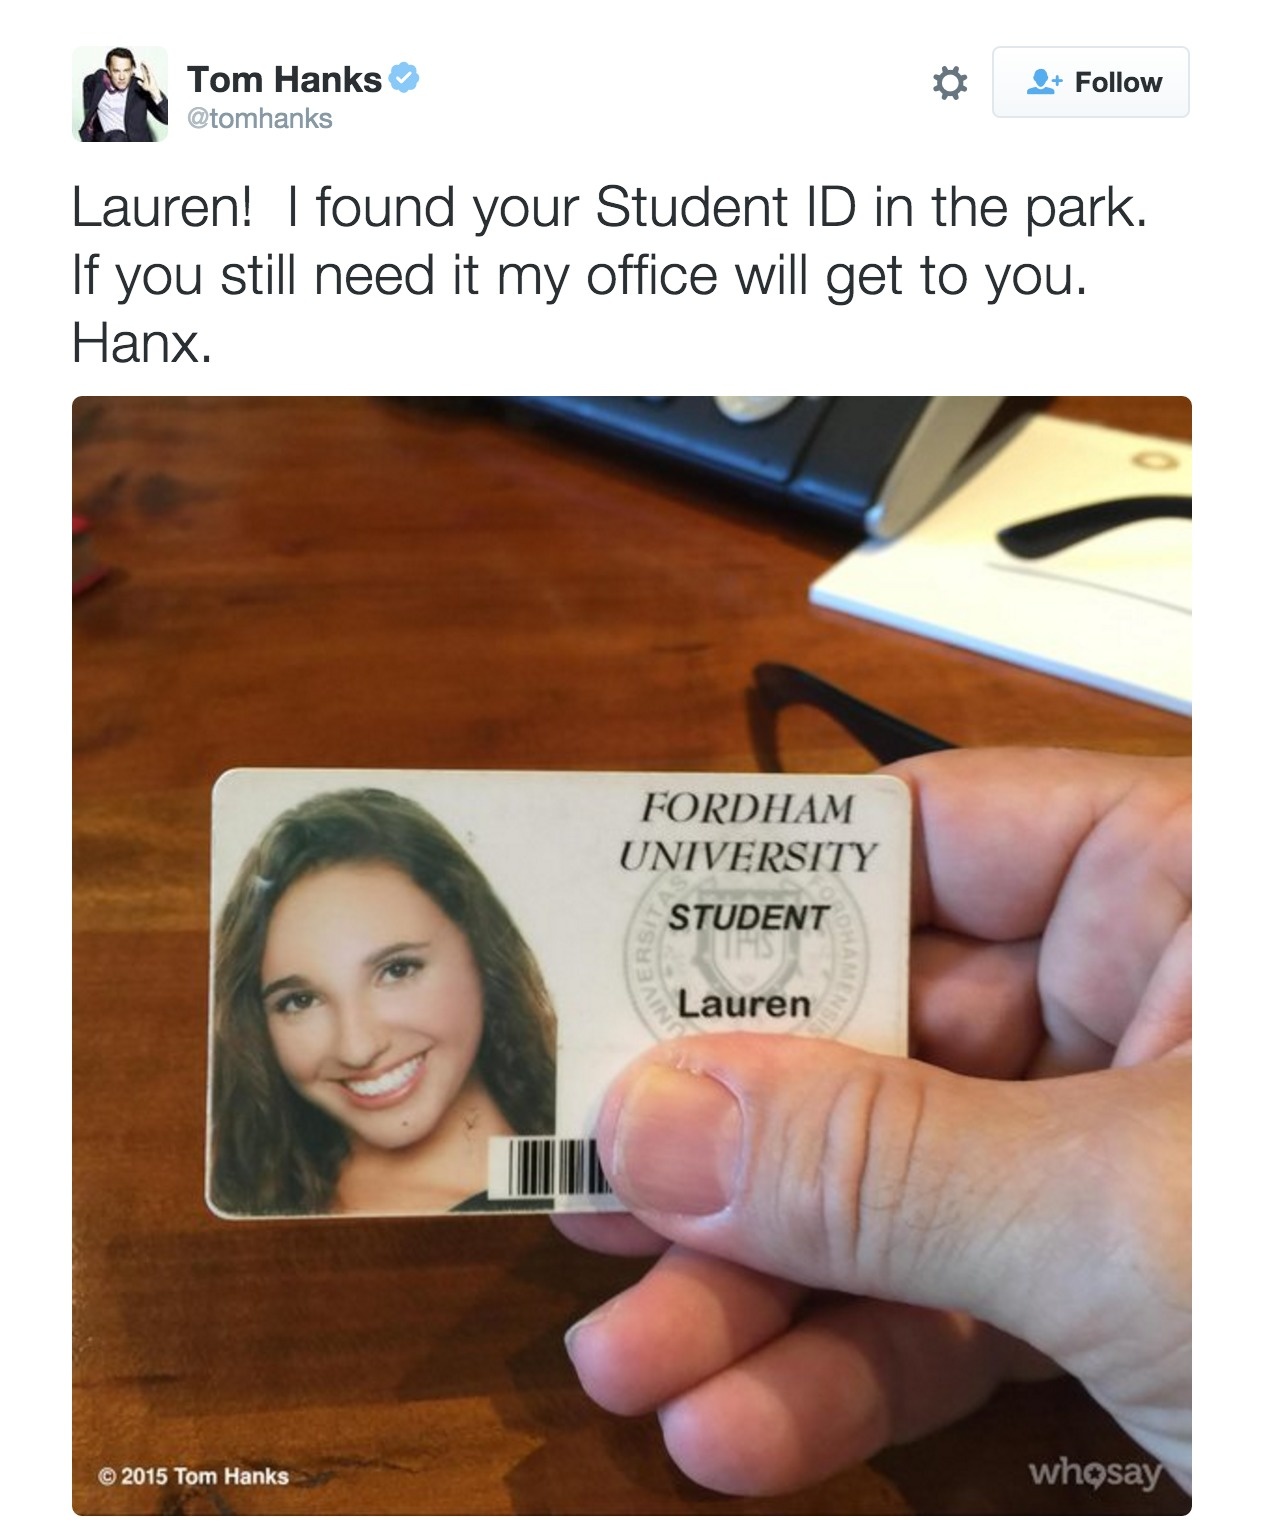 When Tom Hanks' found this Fordham University student's ID, he took to social media to make sure the student got it back.